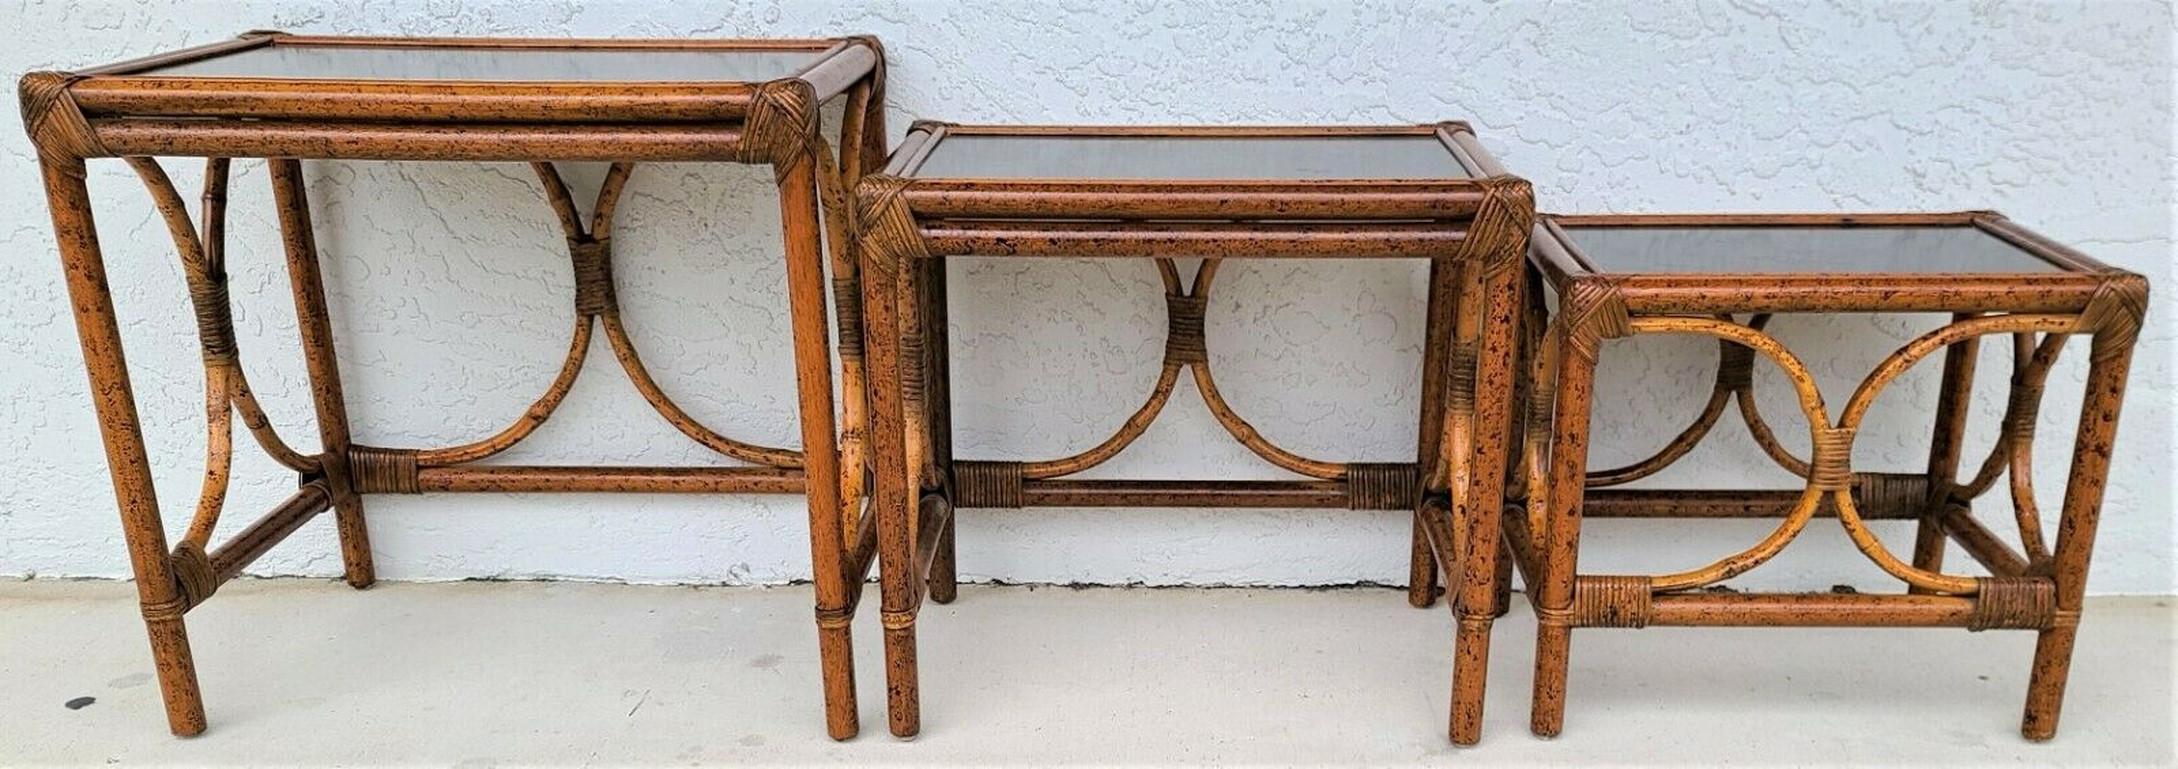 Unknown Vintage Asian Tiger Bamboo Rattan Nesting Tables For Sale